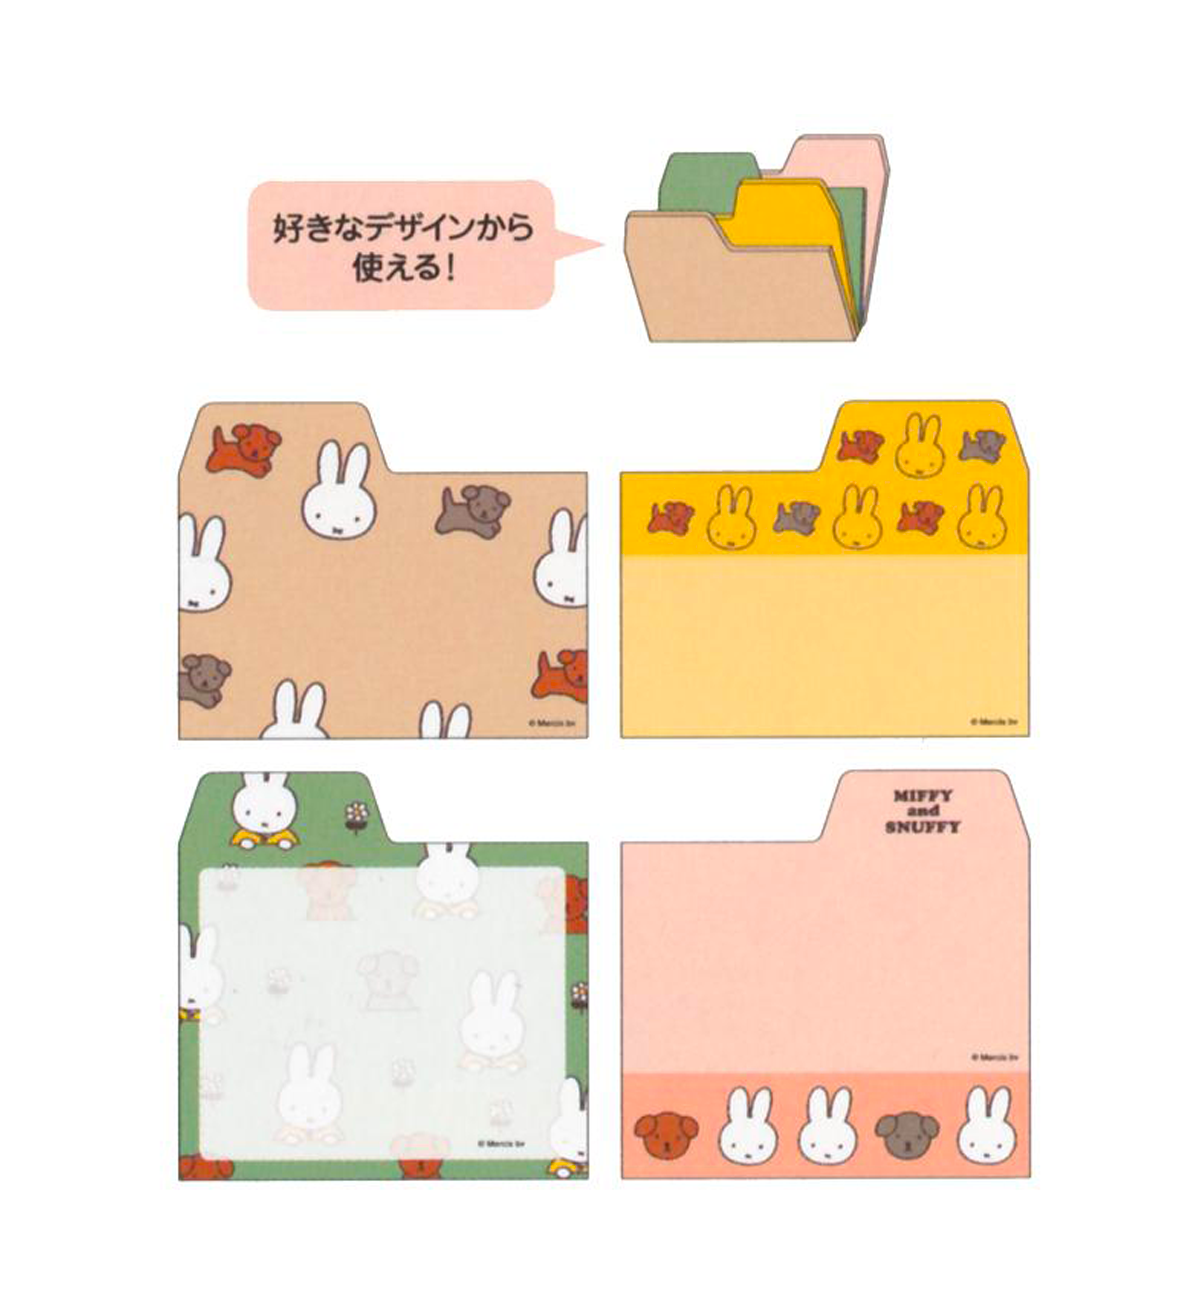 Miffy & Snuffy Index Sticky Note [Green]